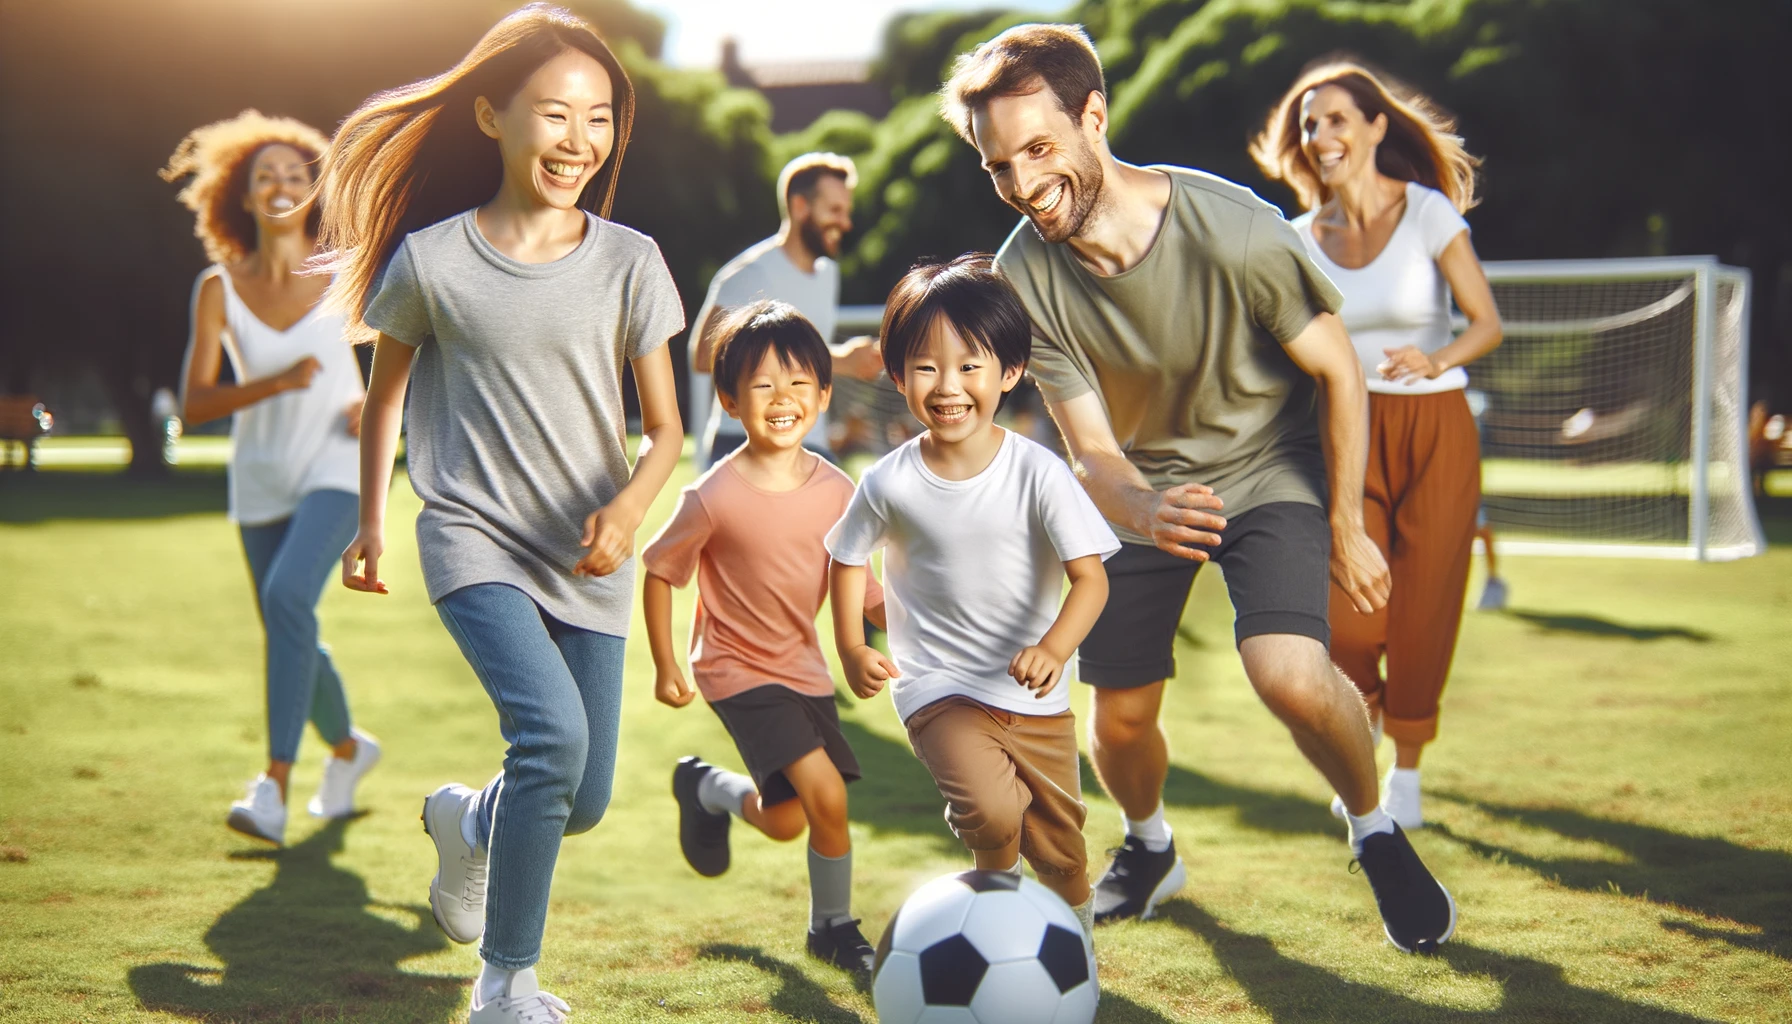 A diverse family playing soccer in a sunlit park, with an Asian mother, Caucasian father, and children with light brown and black hair, epitomizing family physical activity.